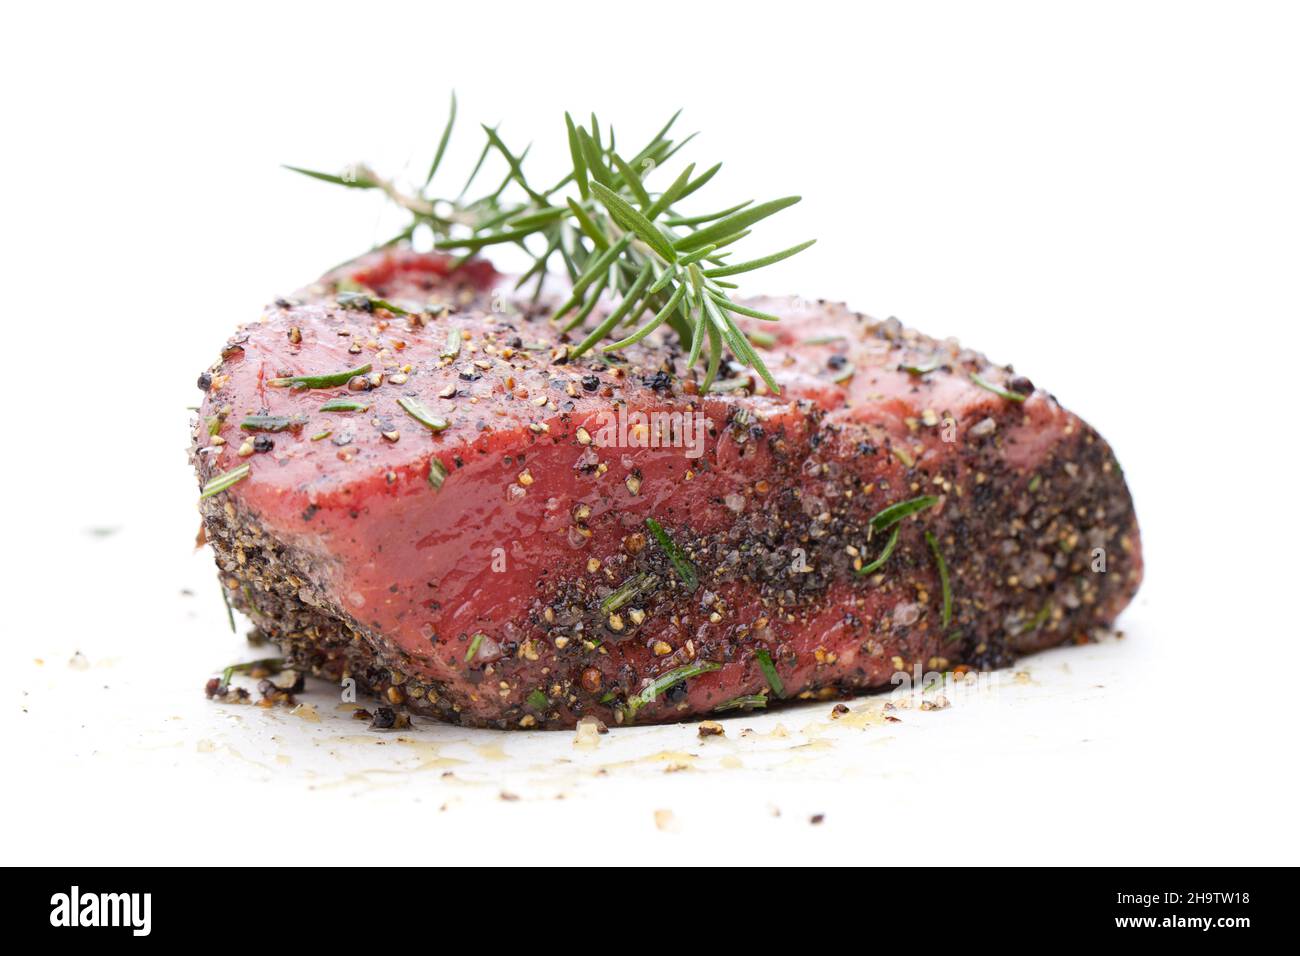 roast beef, beef, raw herbs, rosemary, spice crust, marinade, pepper marinated, spice, twig, sprig of rosemary, roast, fat, black, whole, meat, fresh, Stock Photo